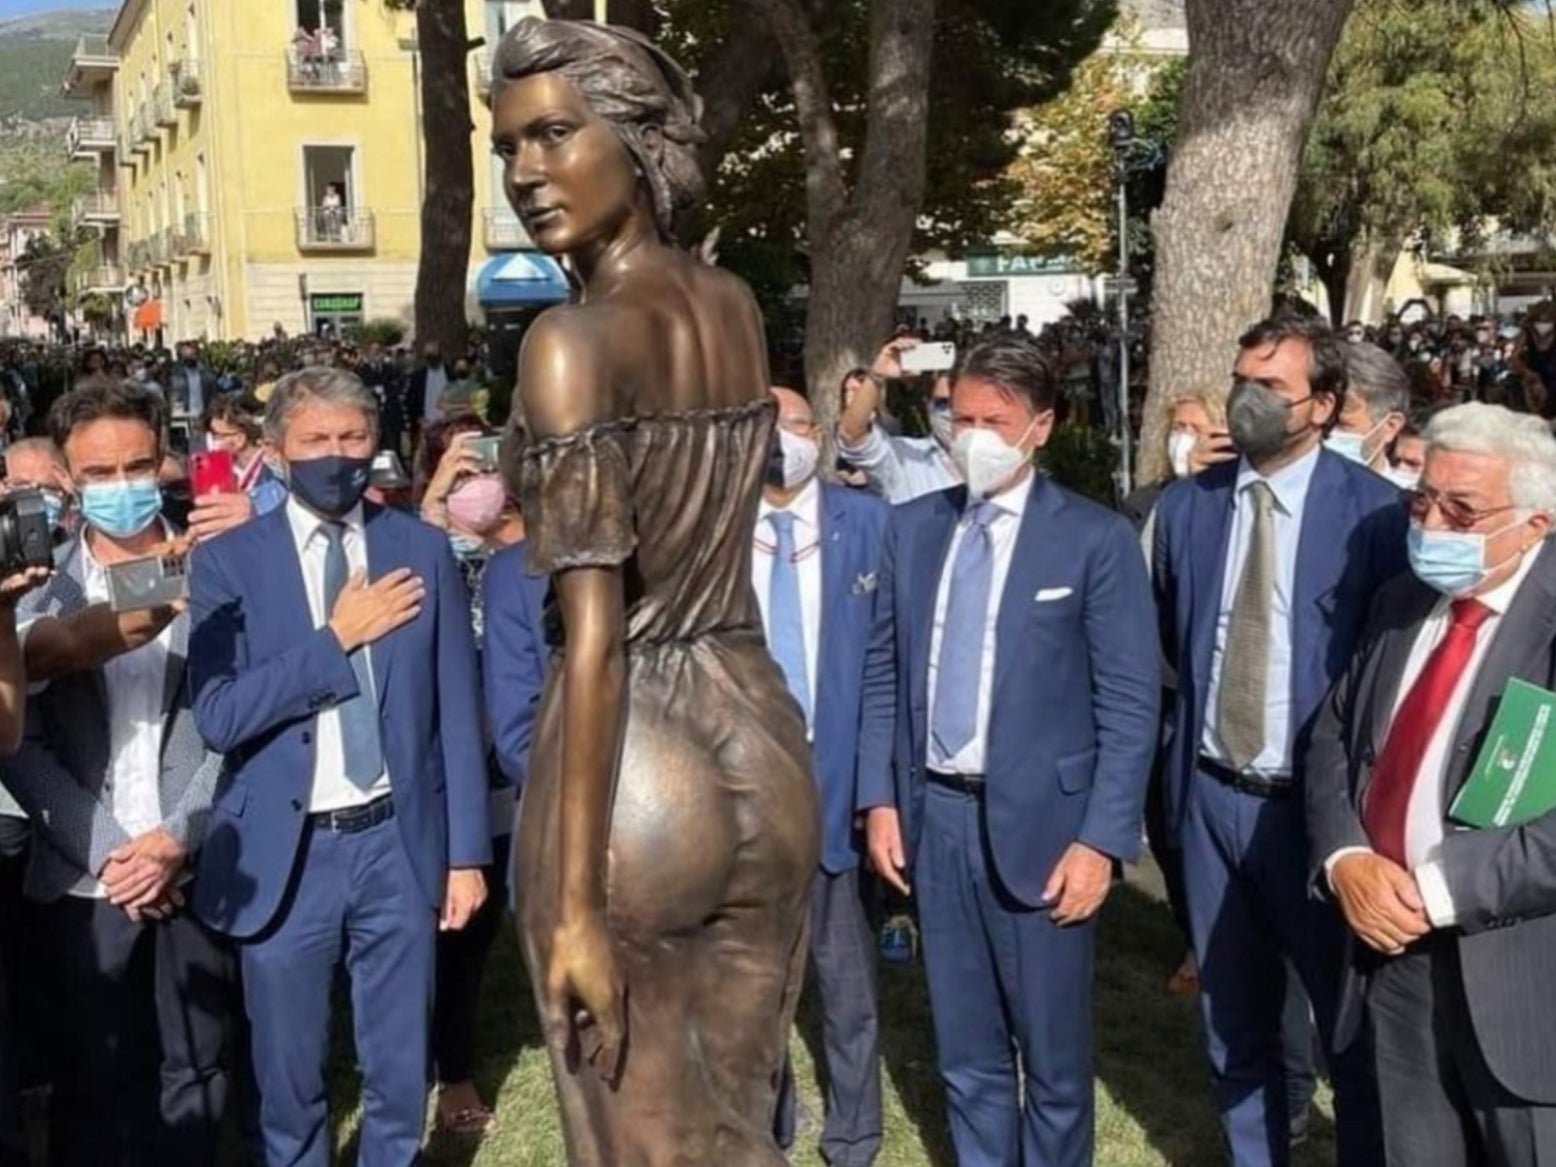 Bronze statue of woman in see-through dress sparks sexism row after it’s unveiled by group of men in Italy